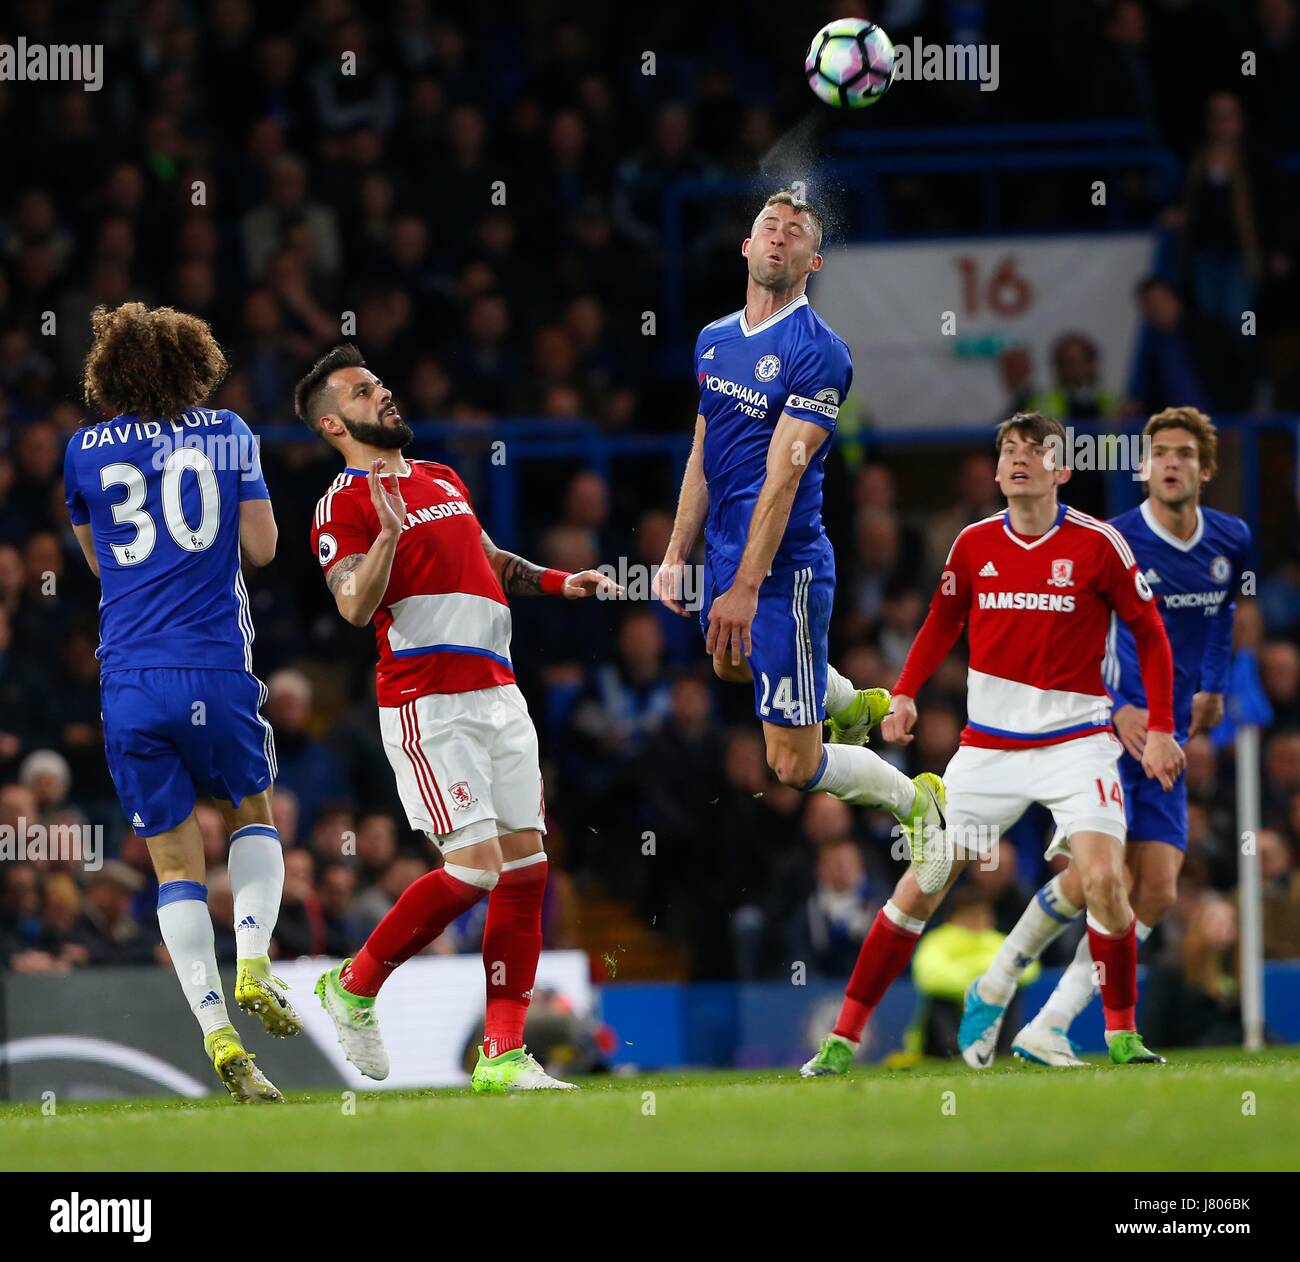 Chelsea's Gary Cahill heads the ball during the Premier League match between Chelsea and Middlesborough at Stamford Bridge in London. 07 May 2017 EDITORIAL USE ONLY  No merchandising. For Football images FA and Premier League restrictions apply inc. no internet/mobile usage without FAPL license - for details contact Football Dataco Stock Photo